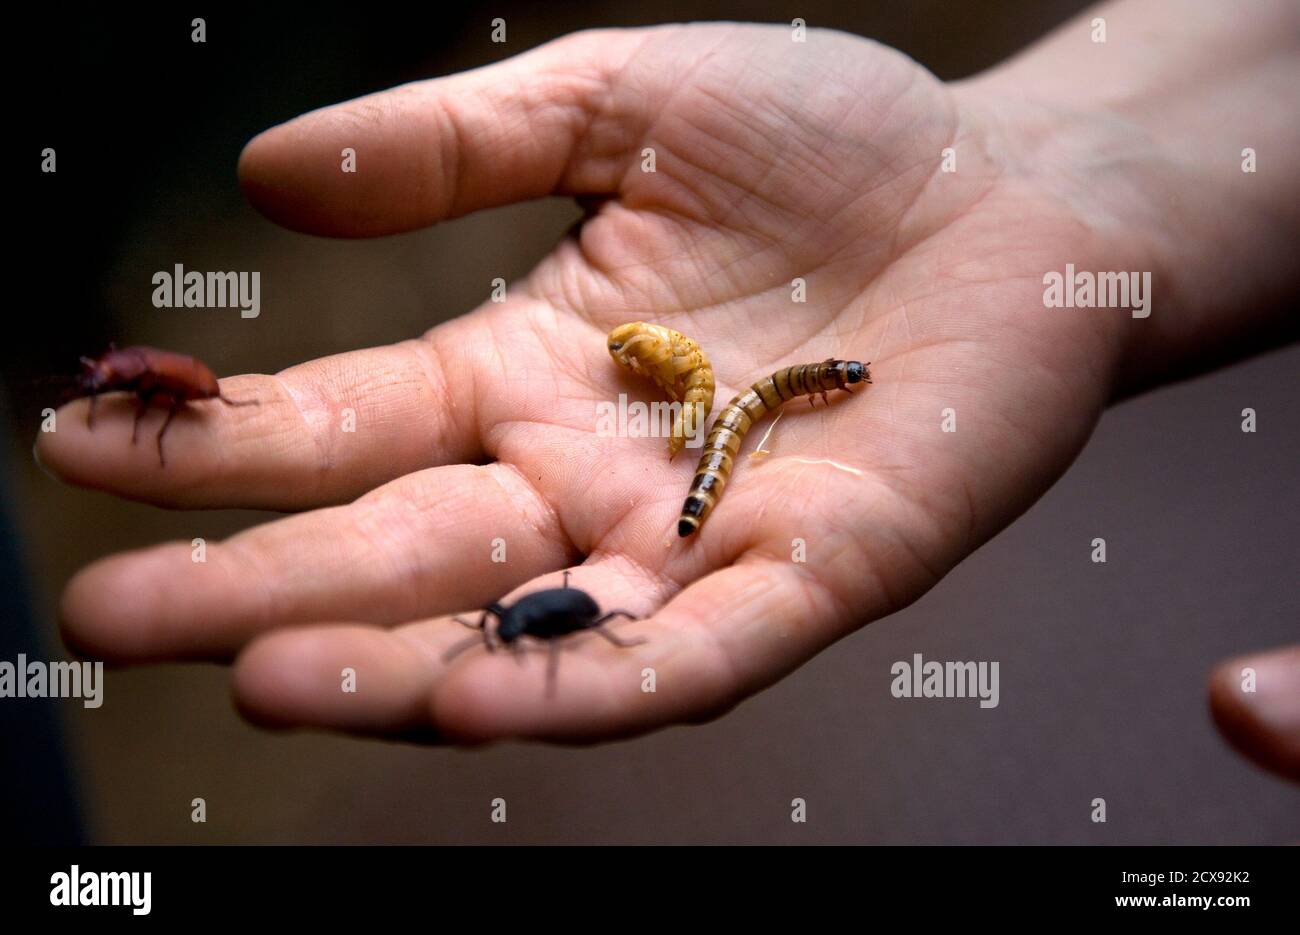 Various stages of beetles crawl around on the palm of a hand at an insect farm in Ermelo January 12, 2011.  Insects are already bred as food for birds, lizards and monkeys at the Callis family's farm near the university, and now the owners see a chance to sell bugs for human consumption.  All you need to do to save the rainforest, improve your diet, better your health, cut global carbon emissions and slash your food budget is eat bugs.  Mealworm quiche, grasshopper springrolls and cuisine made from other creepy crawlies is the answer to the global food crisis, shrinking land and water resource Stock Photo